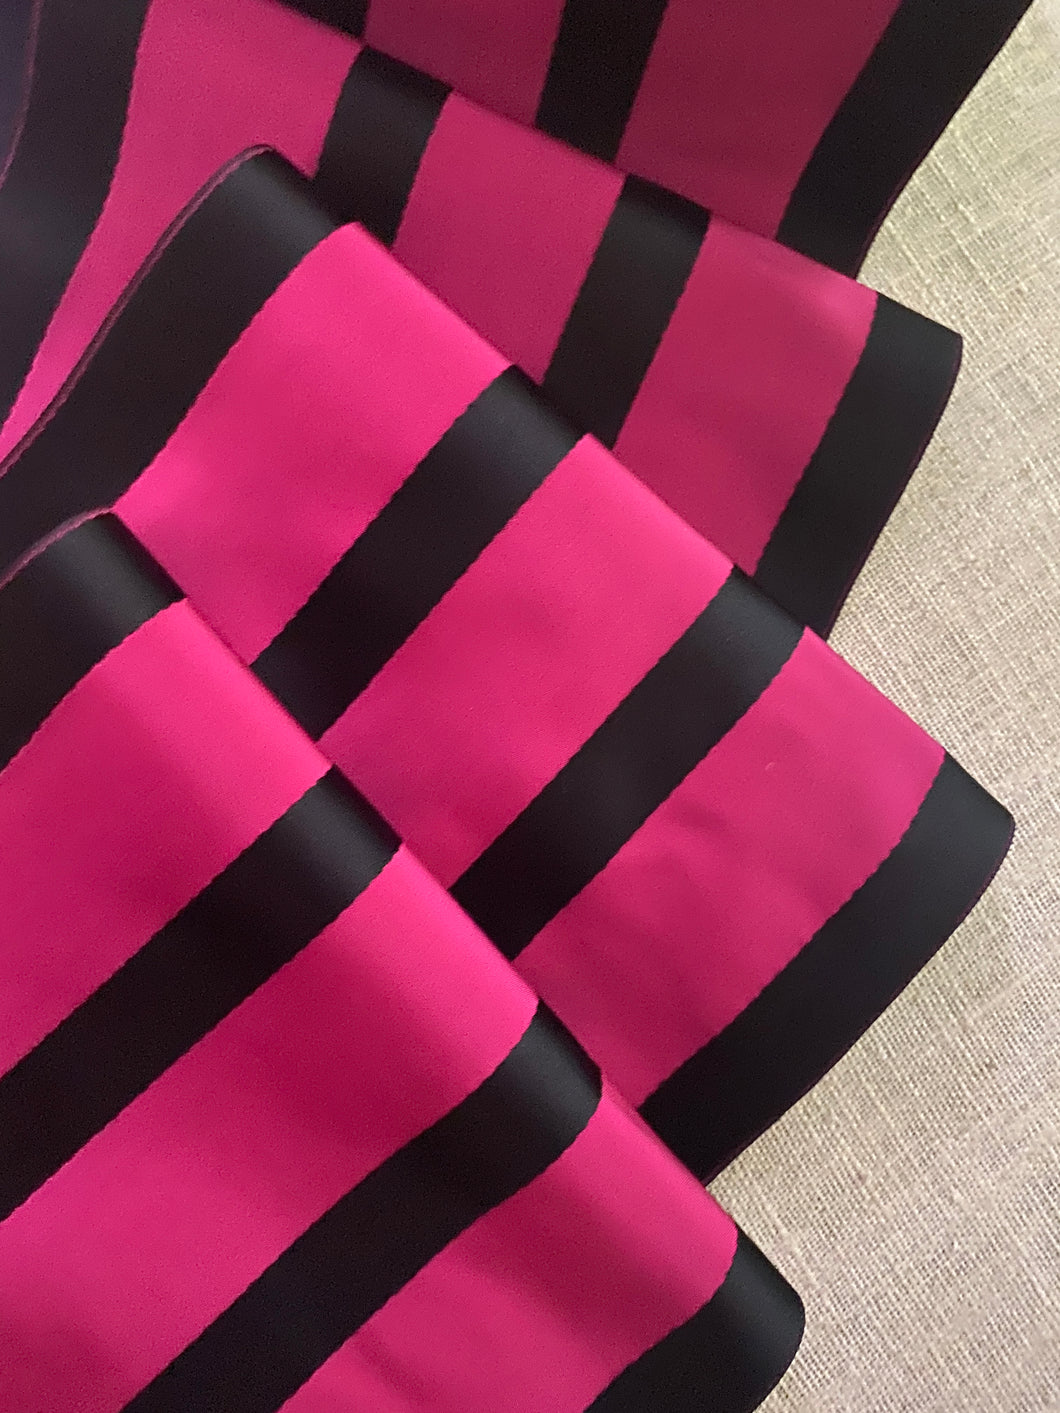 Antique French Ribbon in Shocking Pink with Black Stripes